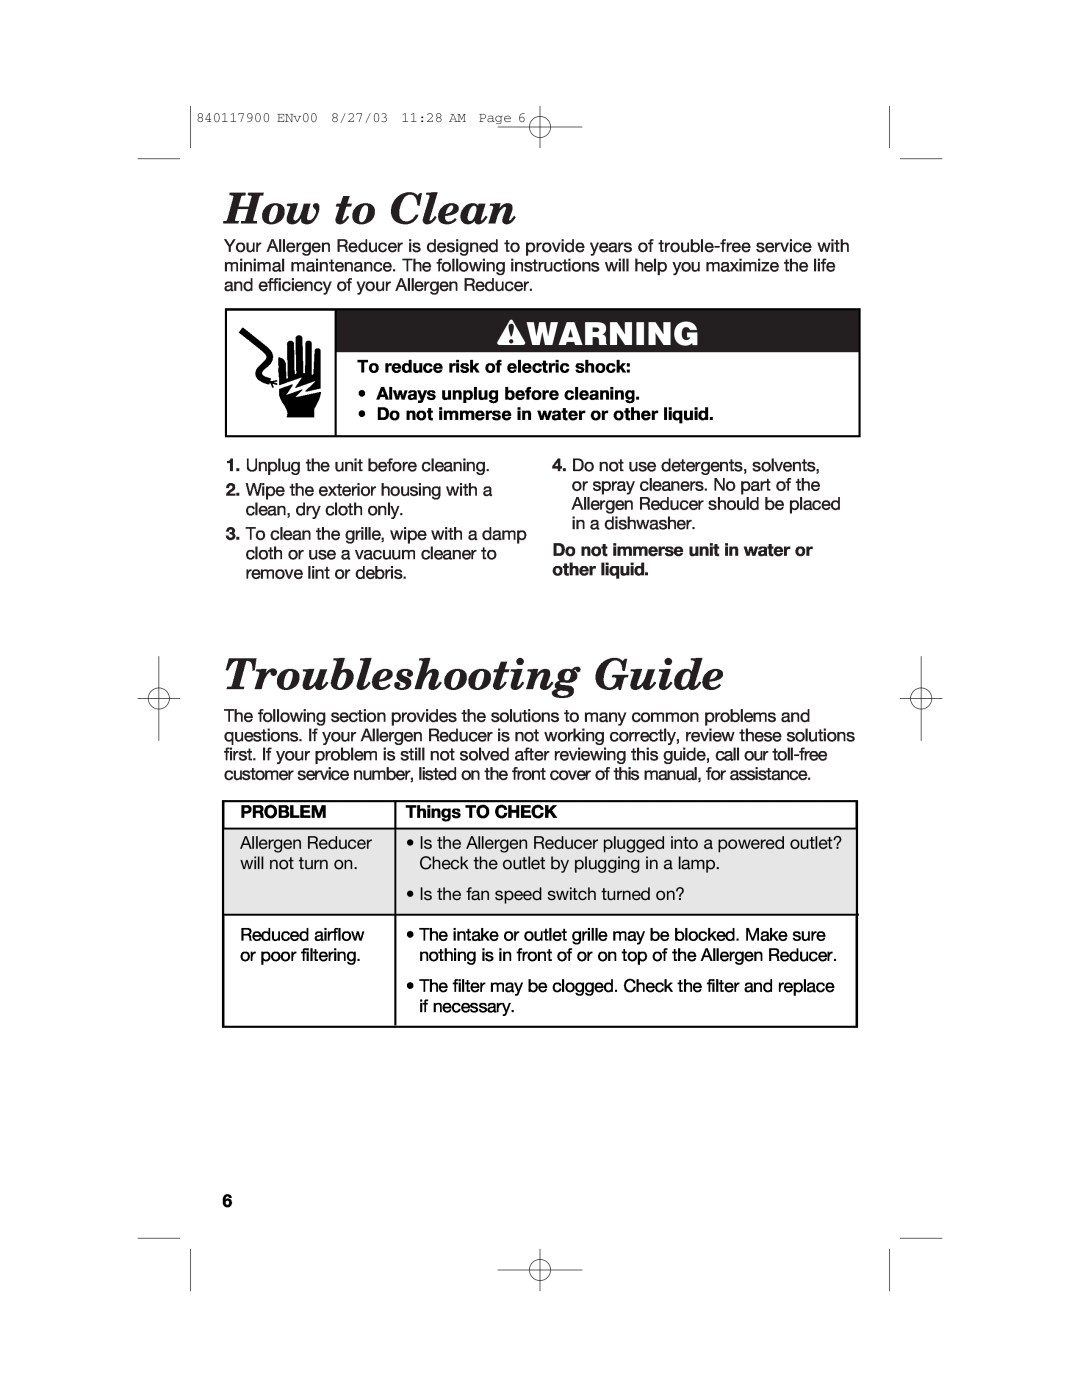 Hamilton Beach 840117900 manual How to Clean, Troubleshooting Guide, wWARNING, To reduce risk of electric shock, Problem 